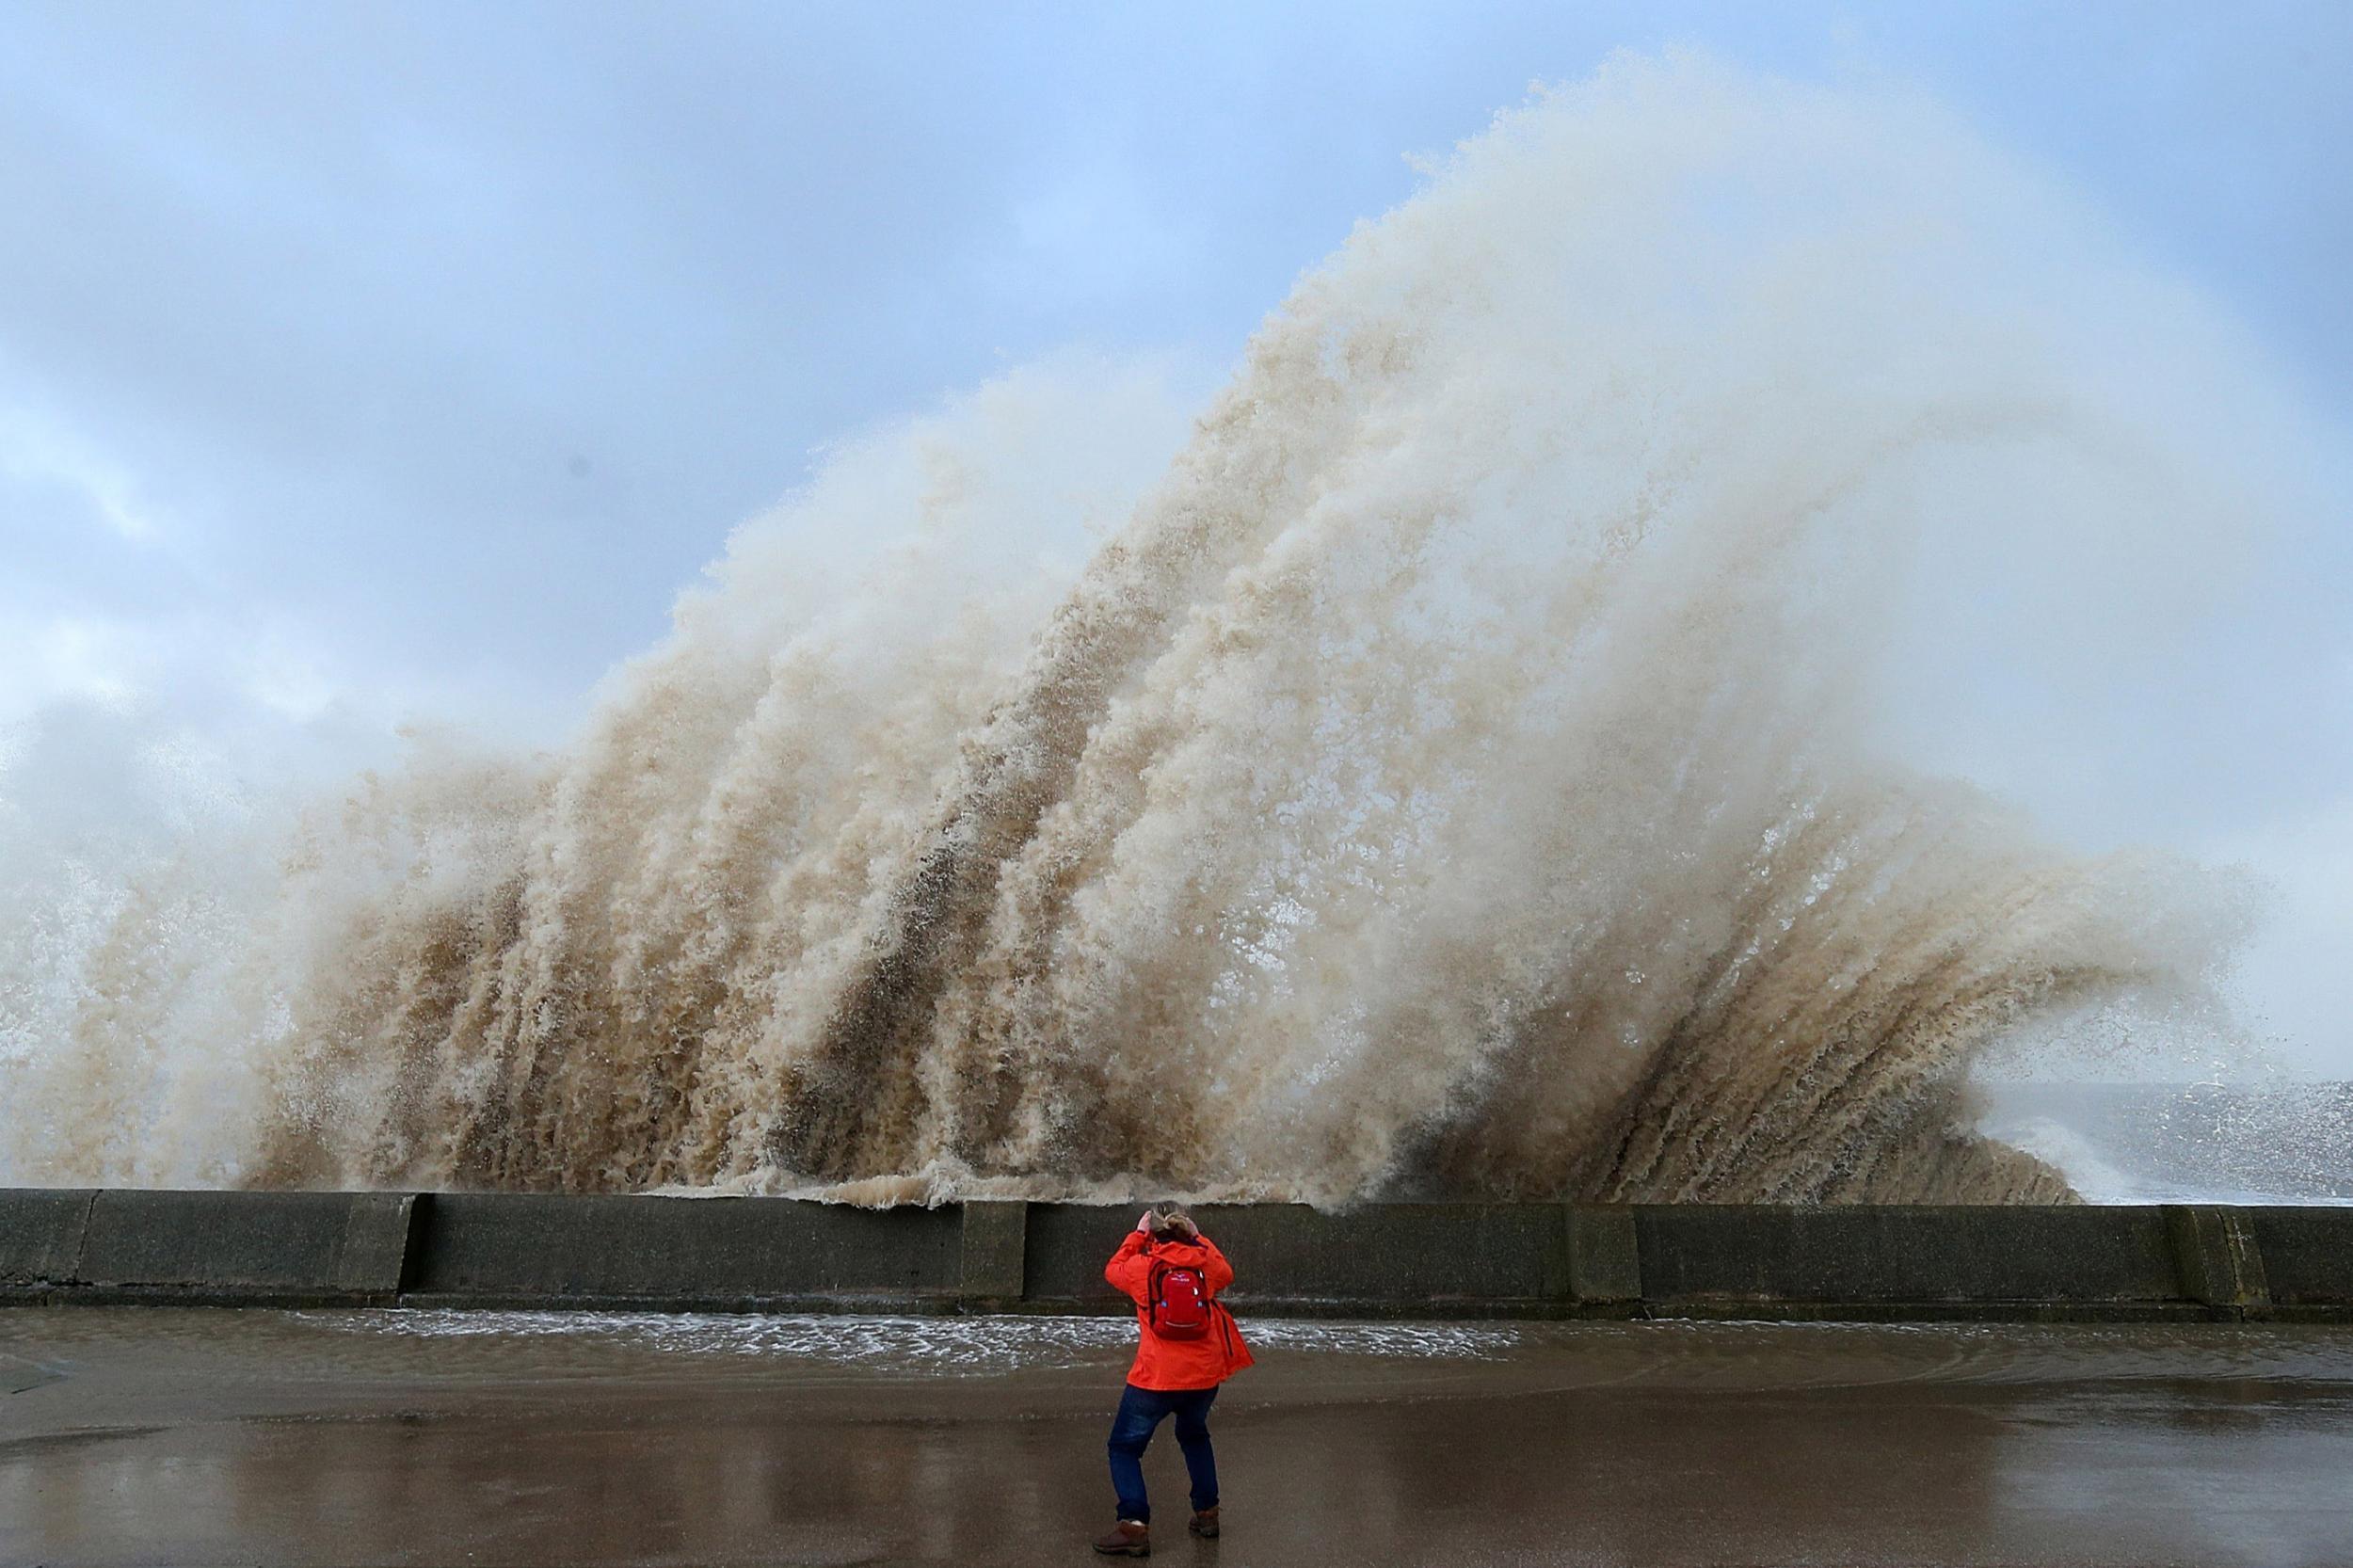 &#13;
High winds caused huge waves in the last 24 hours&#13;